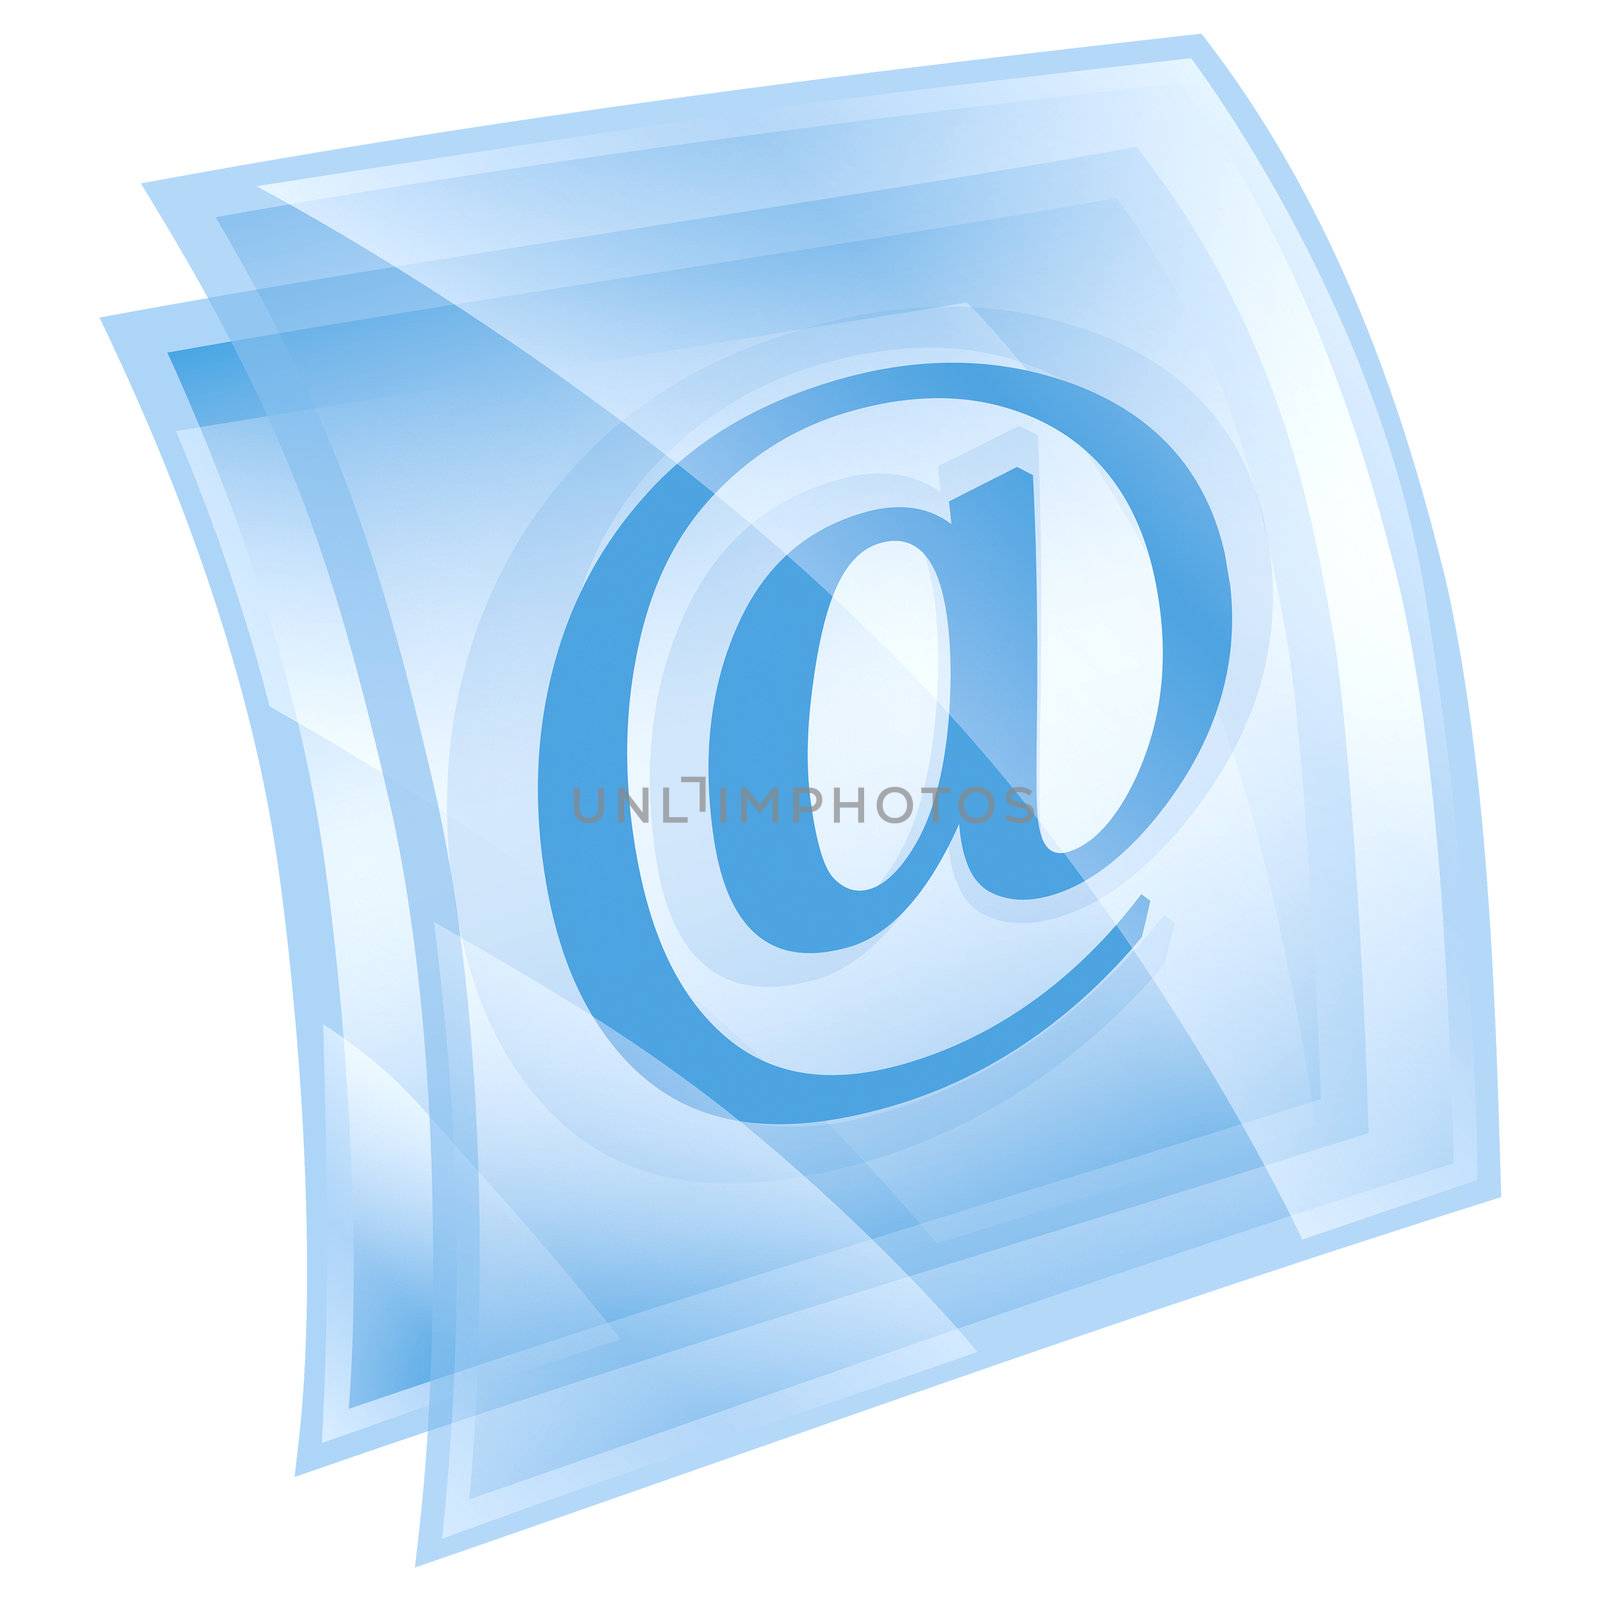 email symbol blue square, isolated on white background. by zeffss